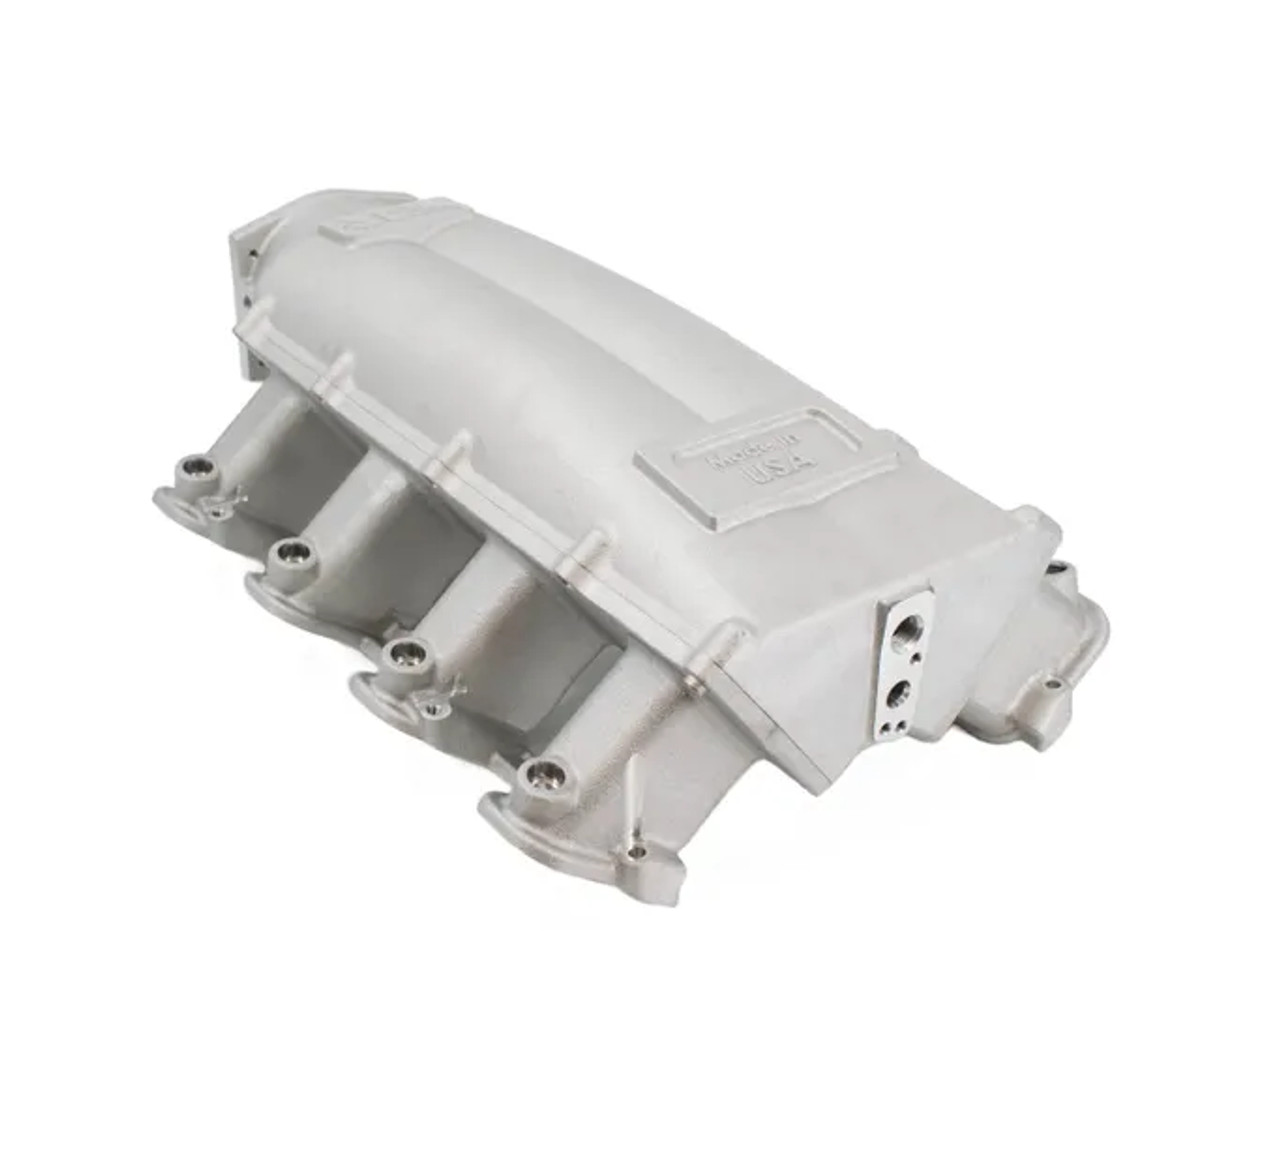 BTR TRINITY INTAKE MANIFOLD FOR LS3 ENGINES - NATURAL - TRA-3-P105